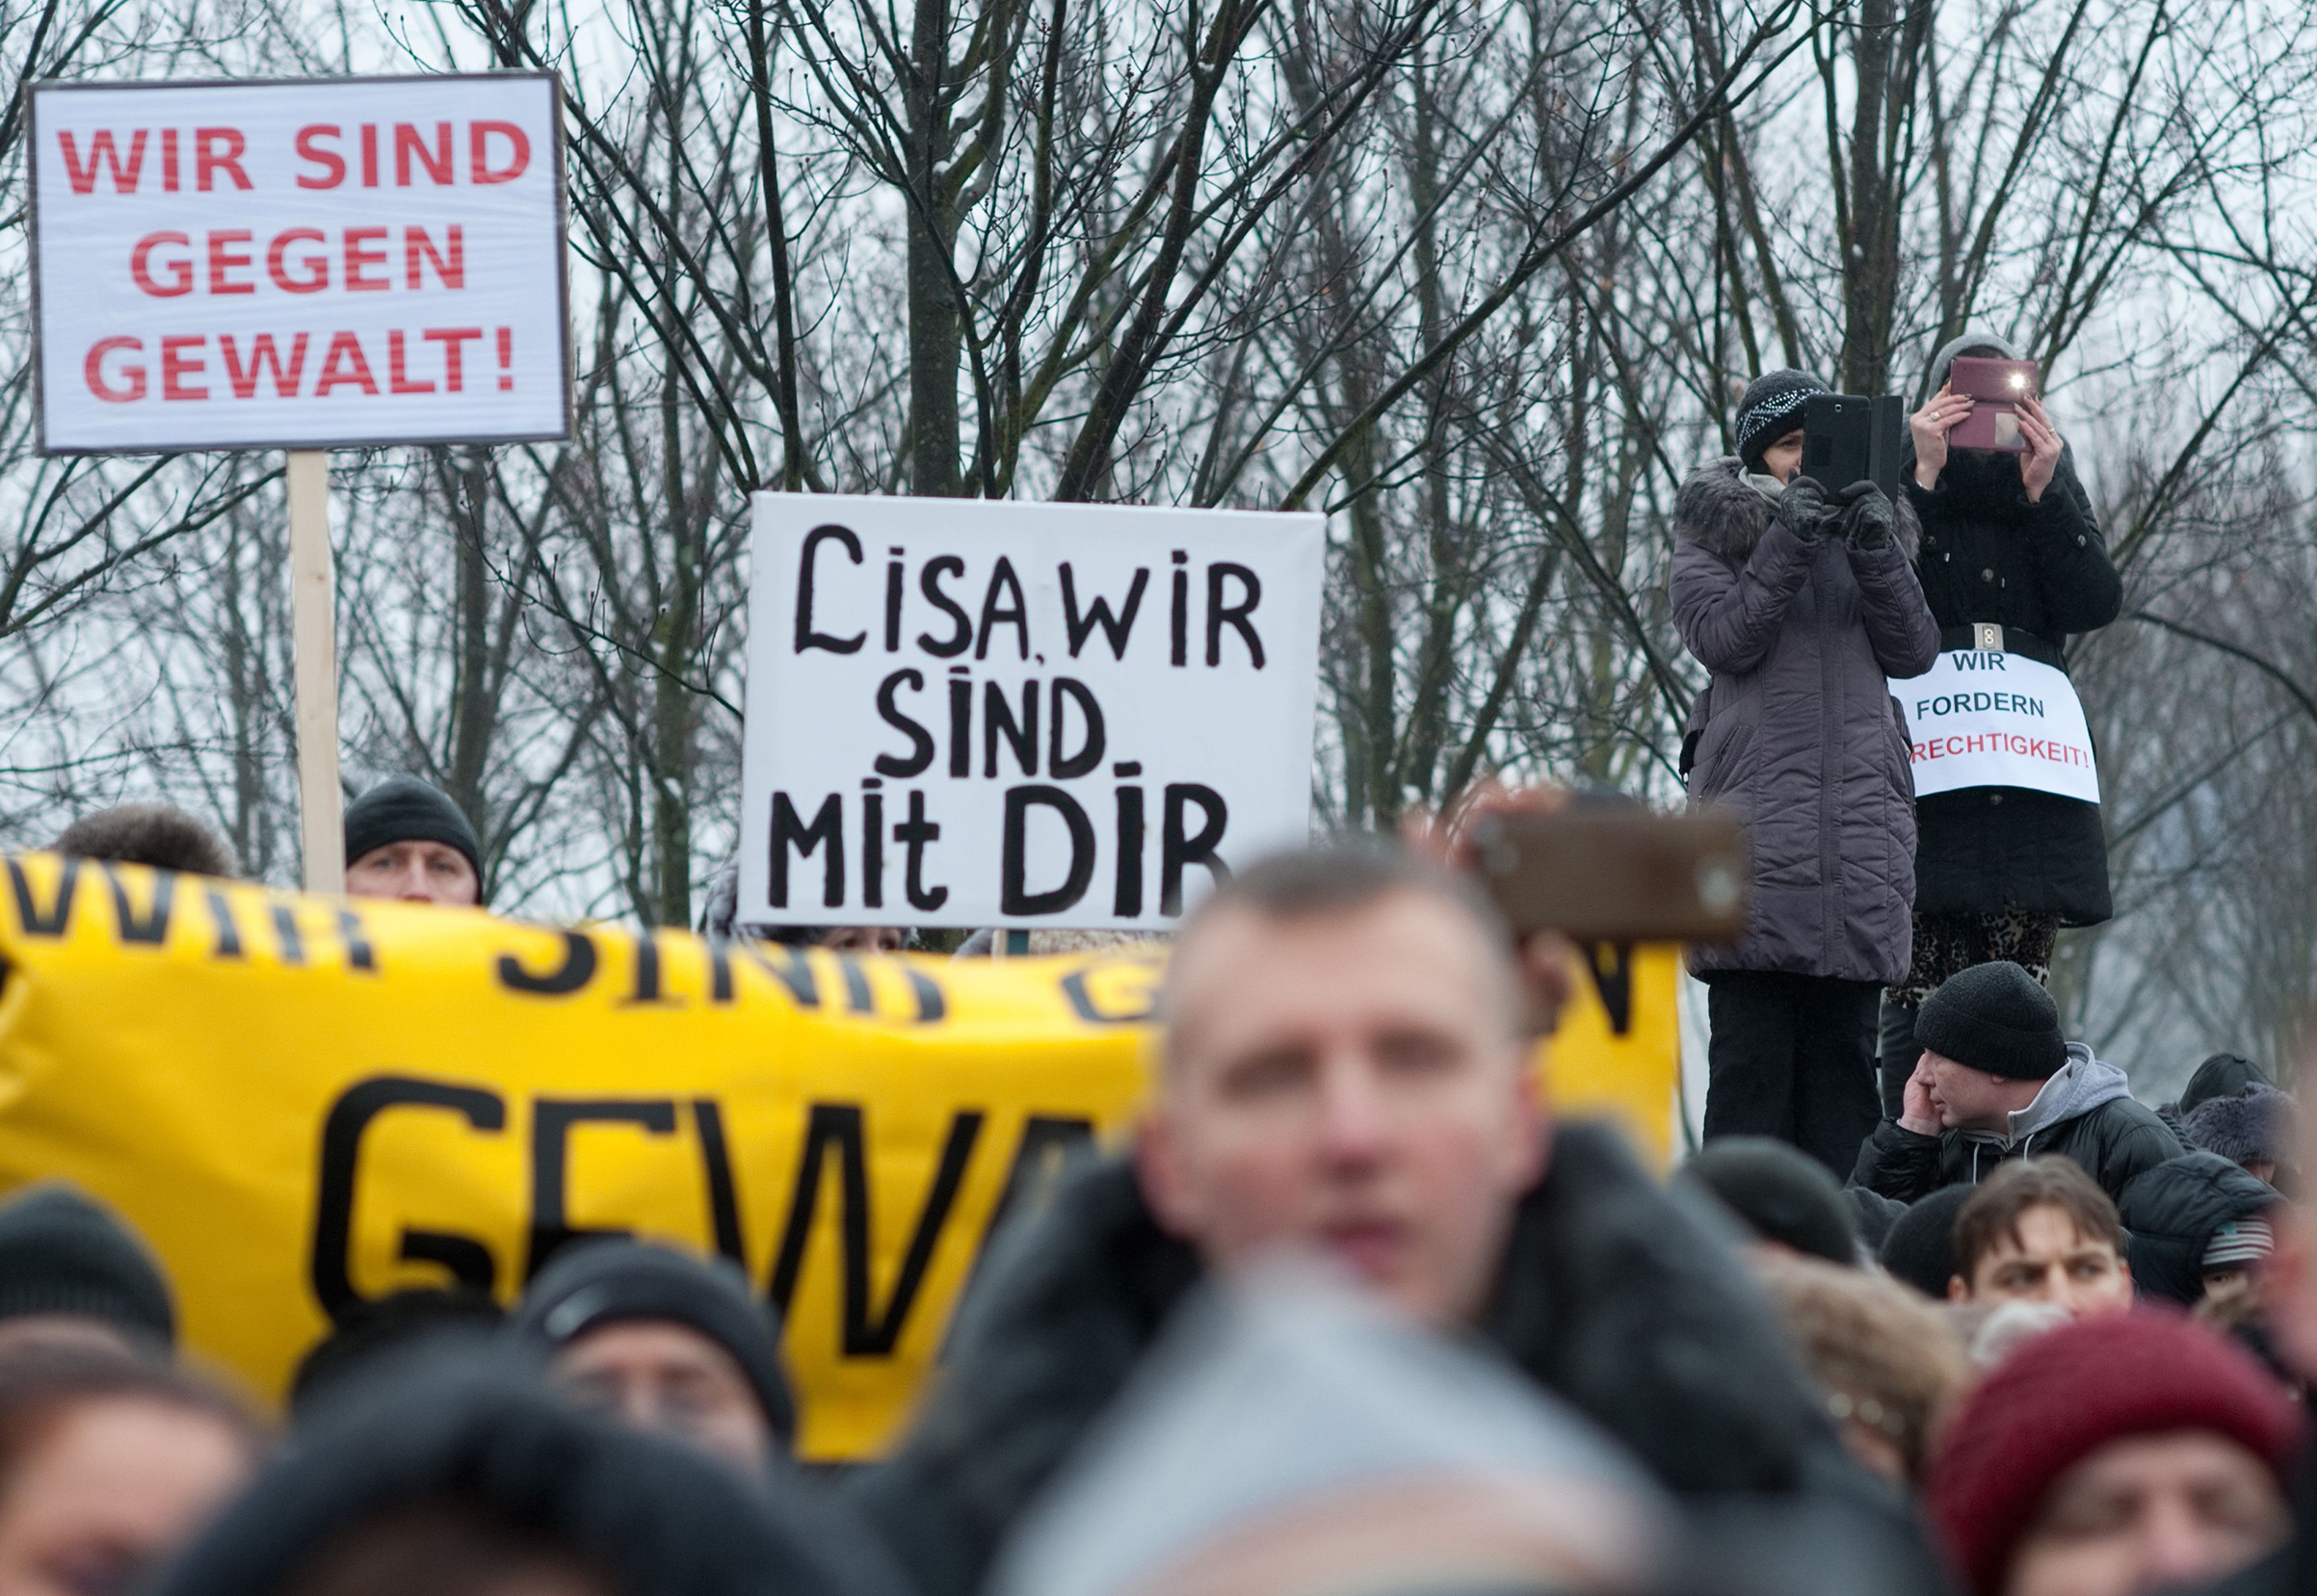 Protesters hold up a sign reading "Lisa, we are with you" as they demonstrate in front of the chancellery after Russian media spread a story -- quickly debunked by German police -- of three Muslim men who raped a 13-year-old Russian-German girl, in Berlin on Jan. 23, 2016. (Klaus-Dietmar Gabbert—dpa/AFP/Getty Images)